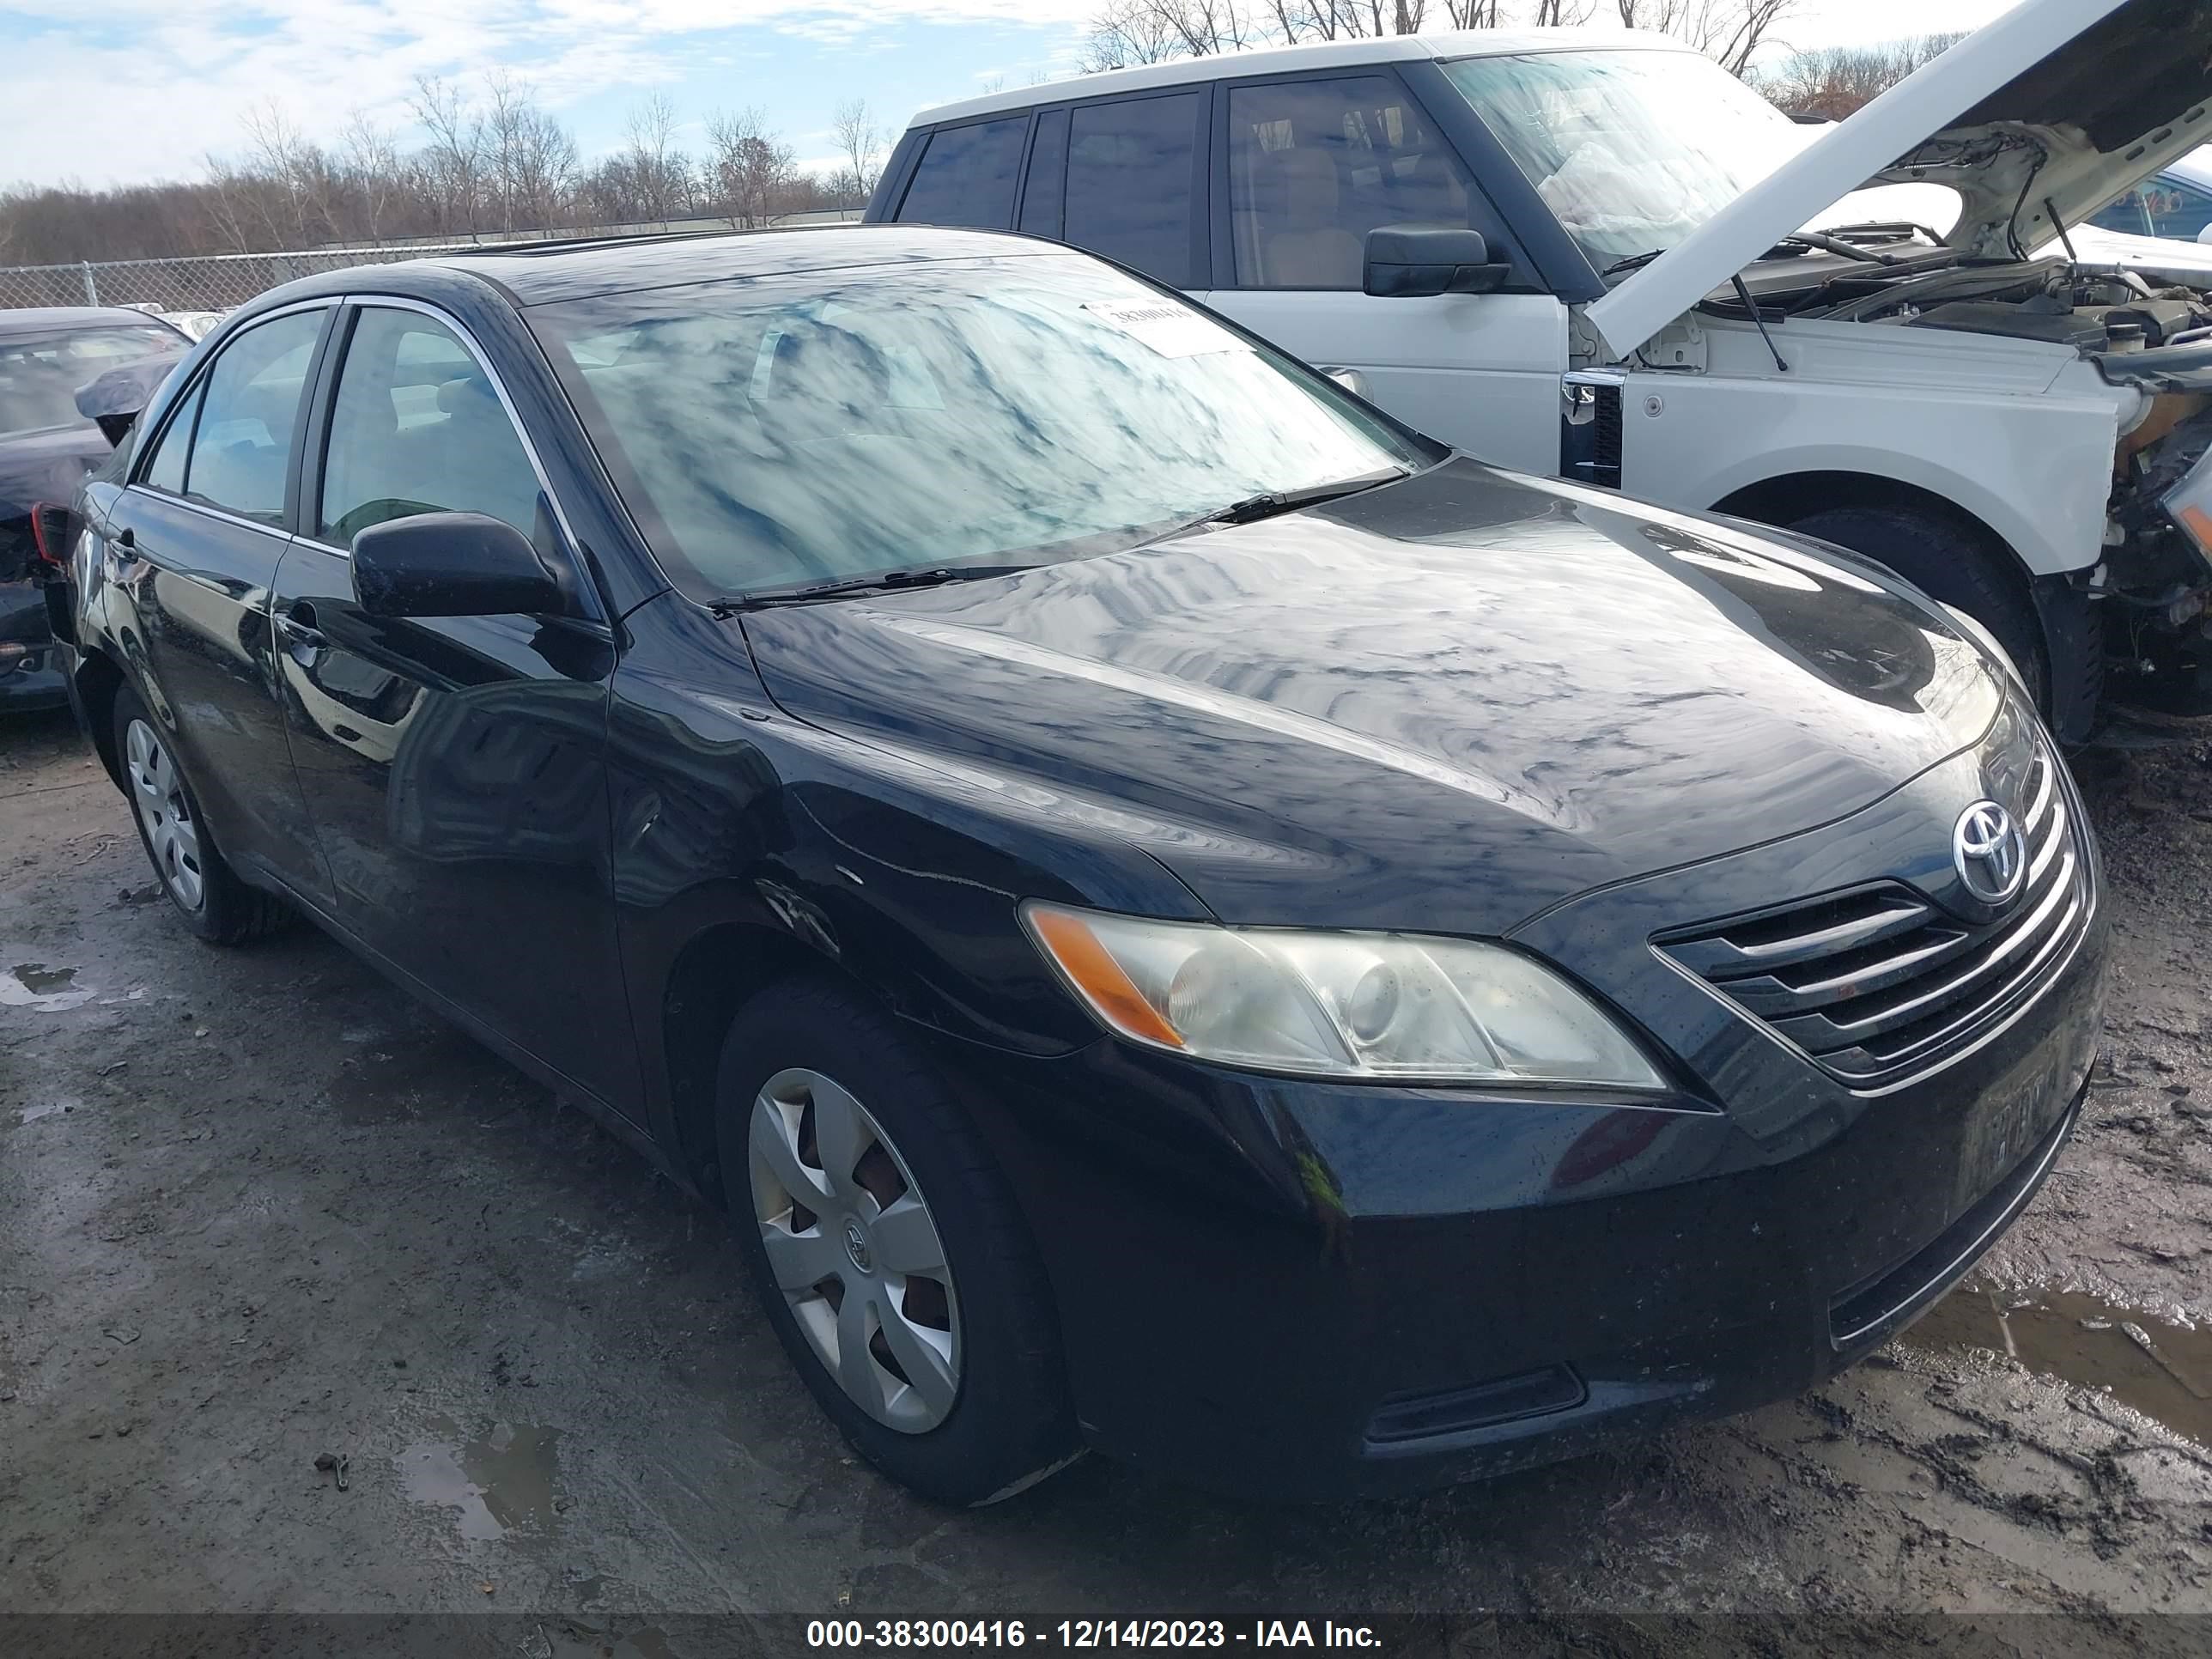 VIN: 4T4BE46K09R061902 - toyota camry